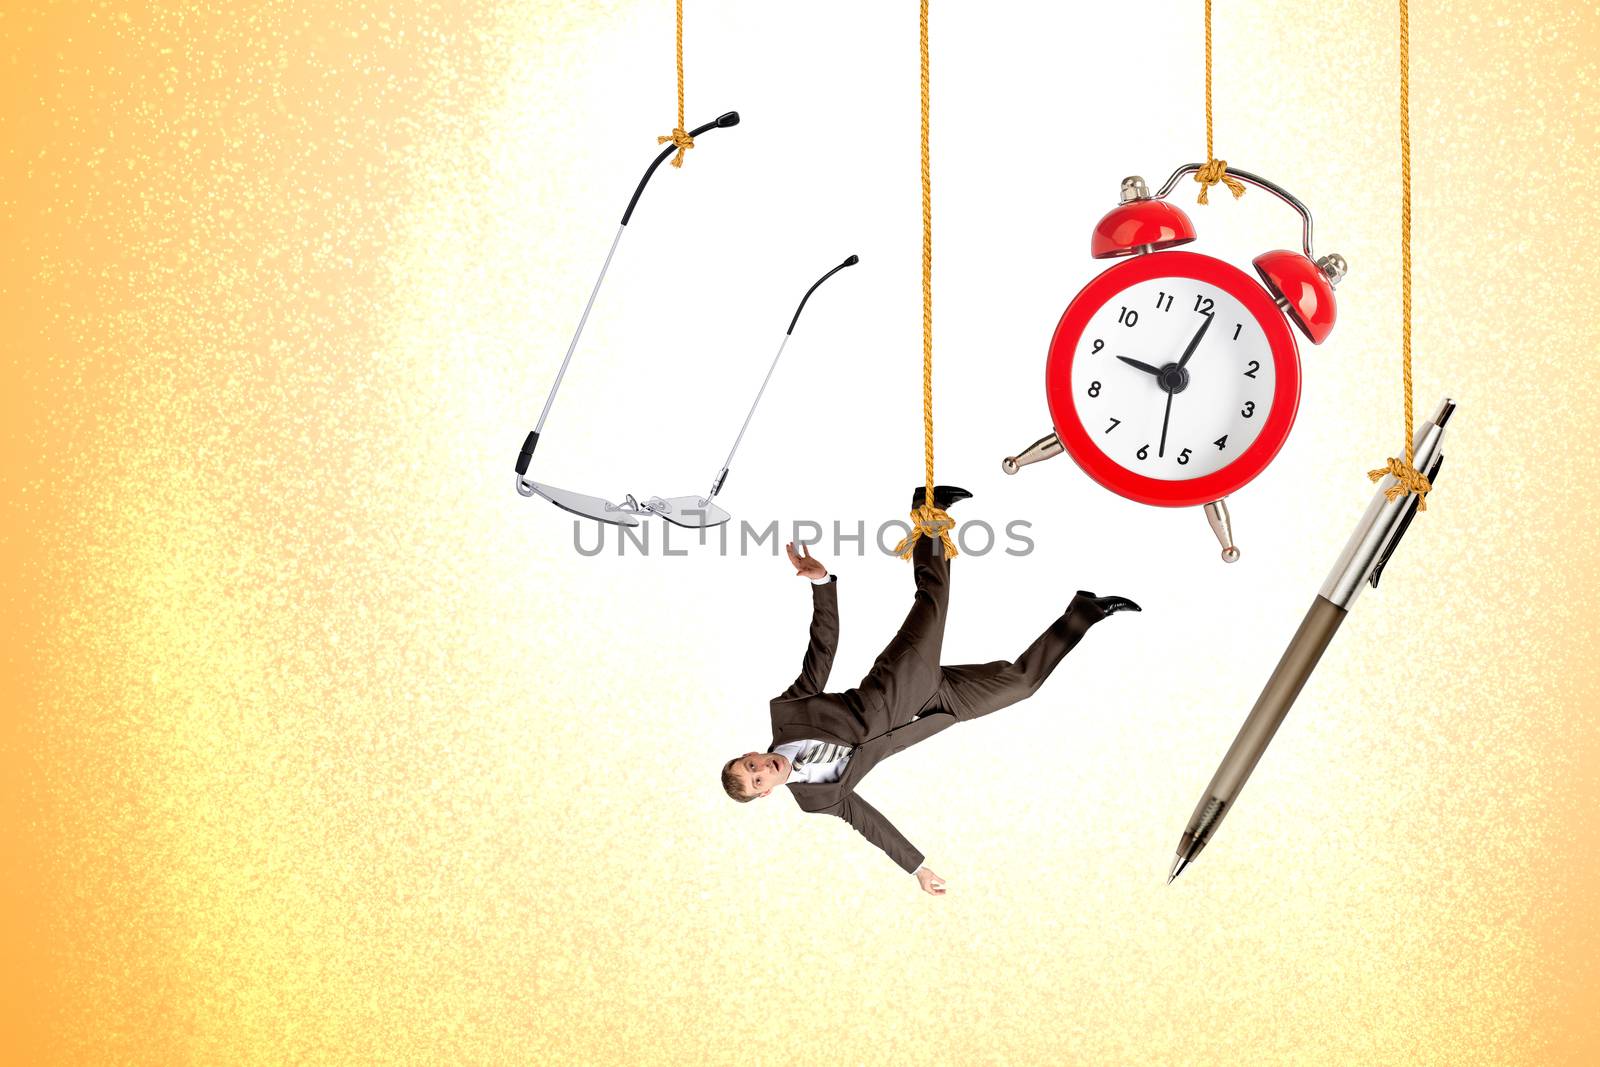 Man hanging on rope with clock, pen and glasses on colorful background